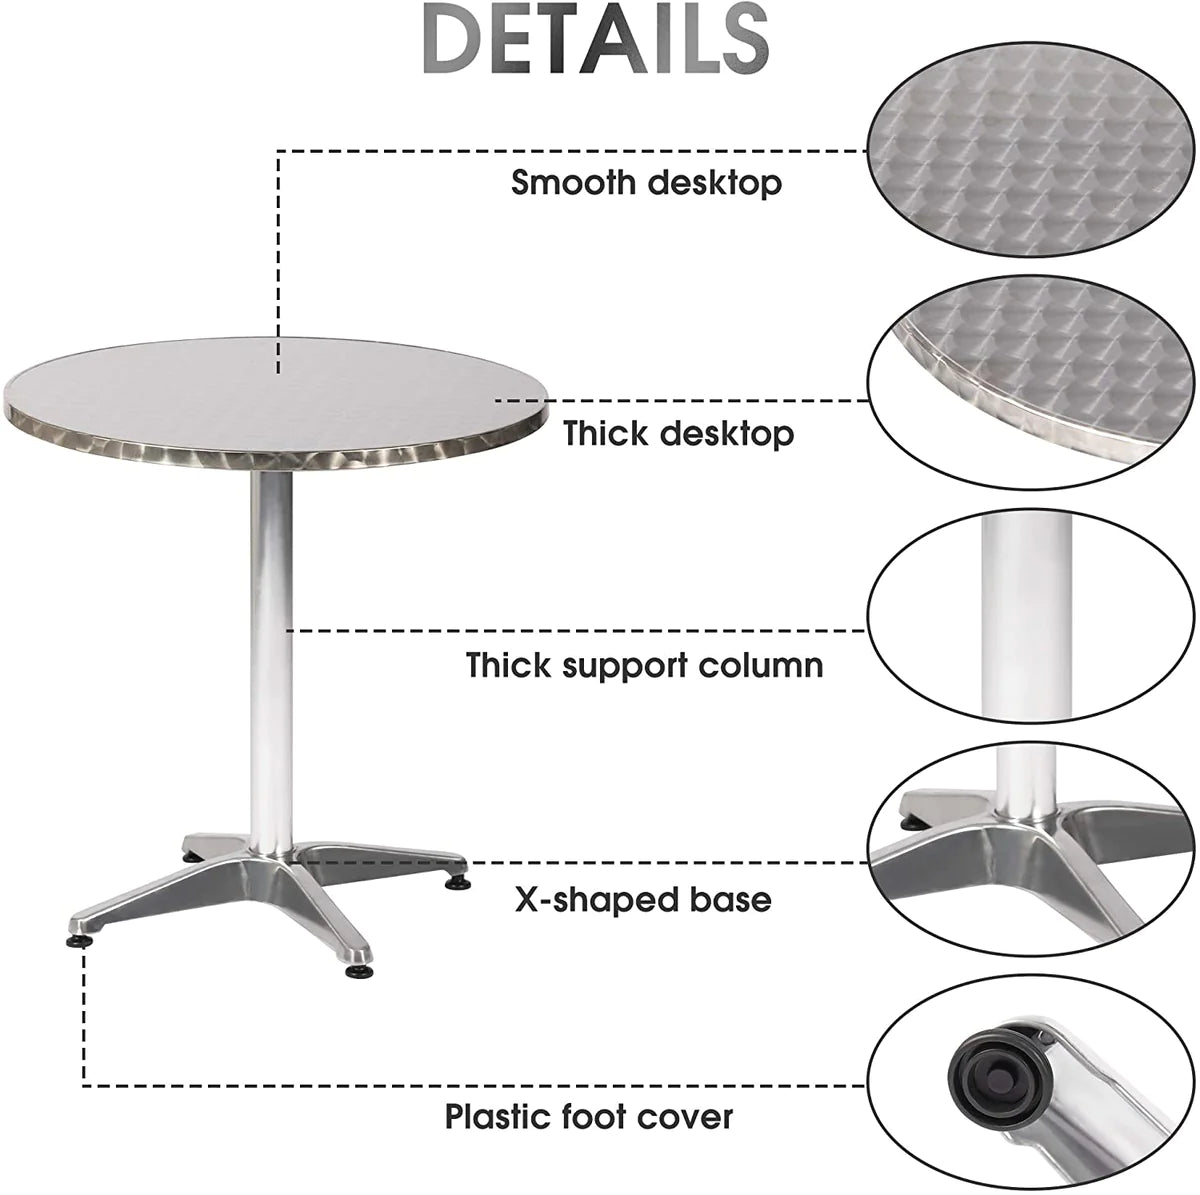 Outdoor courtyard recreation metal round table, X-shaped Base, Multiple dimensions